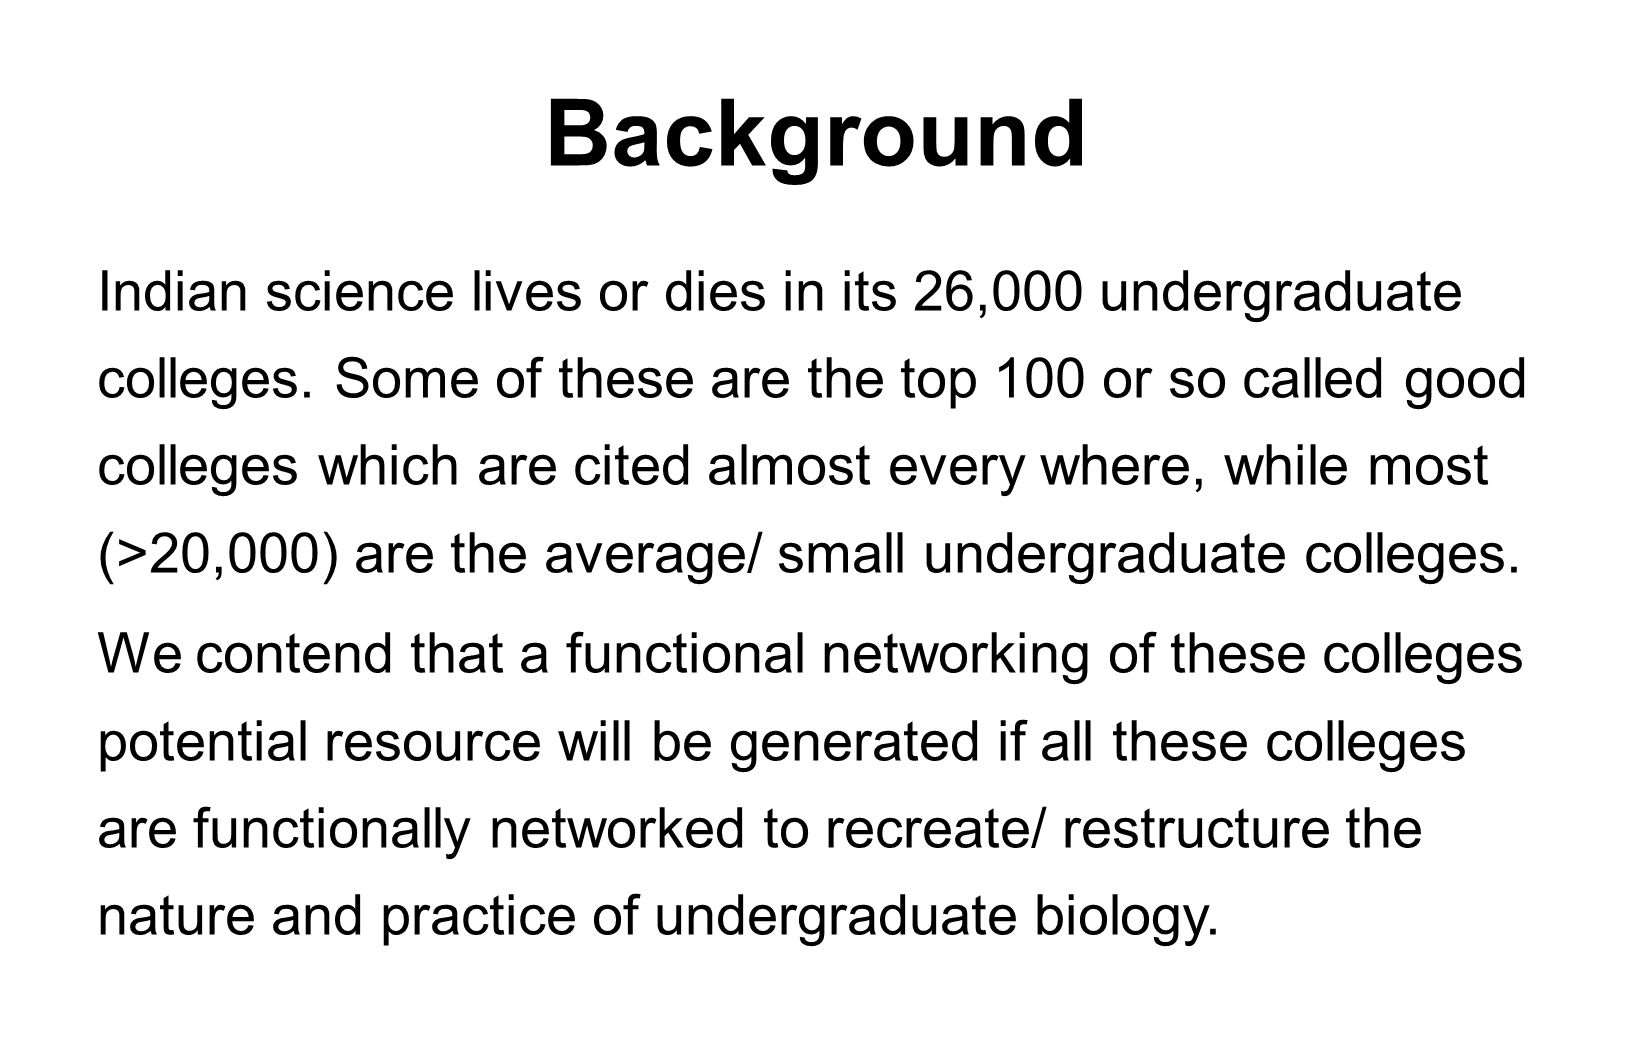 Background Indian science lives or dies in its 26,000 undergraduate colleges.